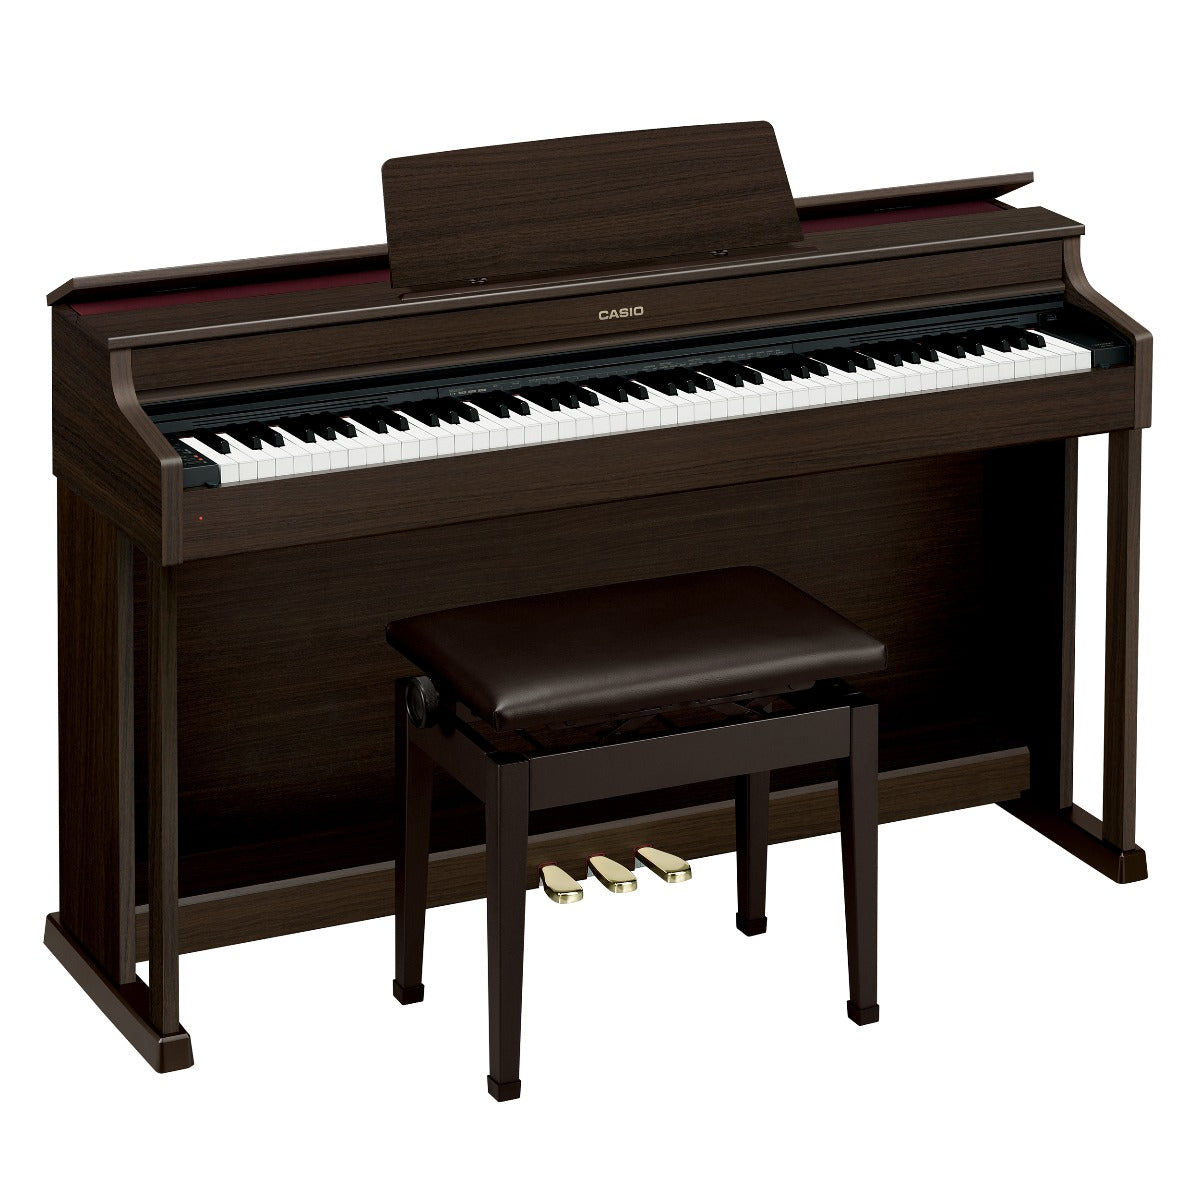 Casio Celviano AP-470 Digital Piano - Brown Walnut - Right angle view with matching adjustable bench